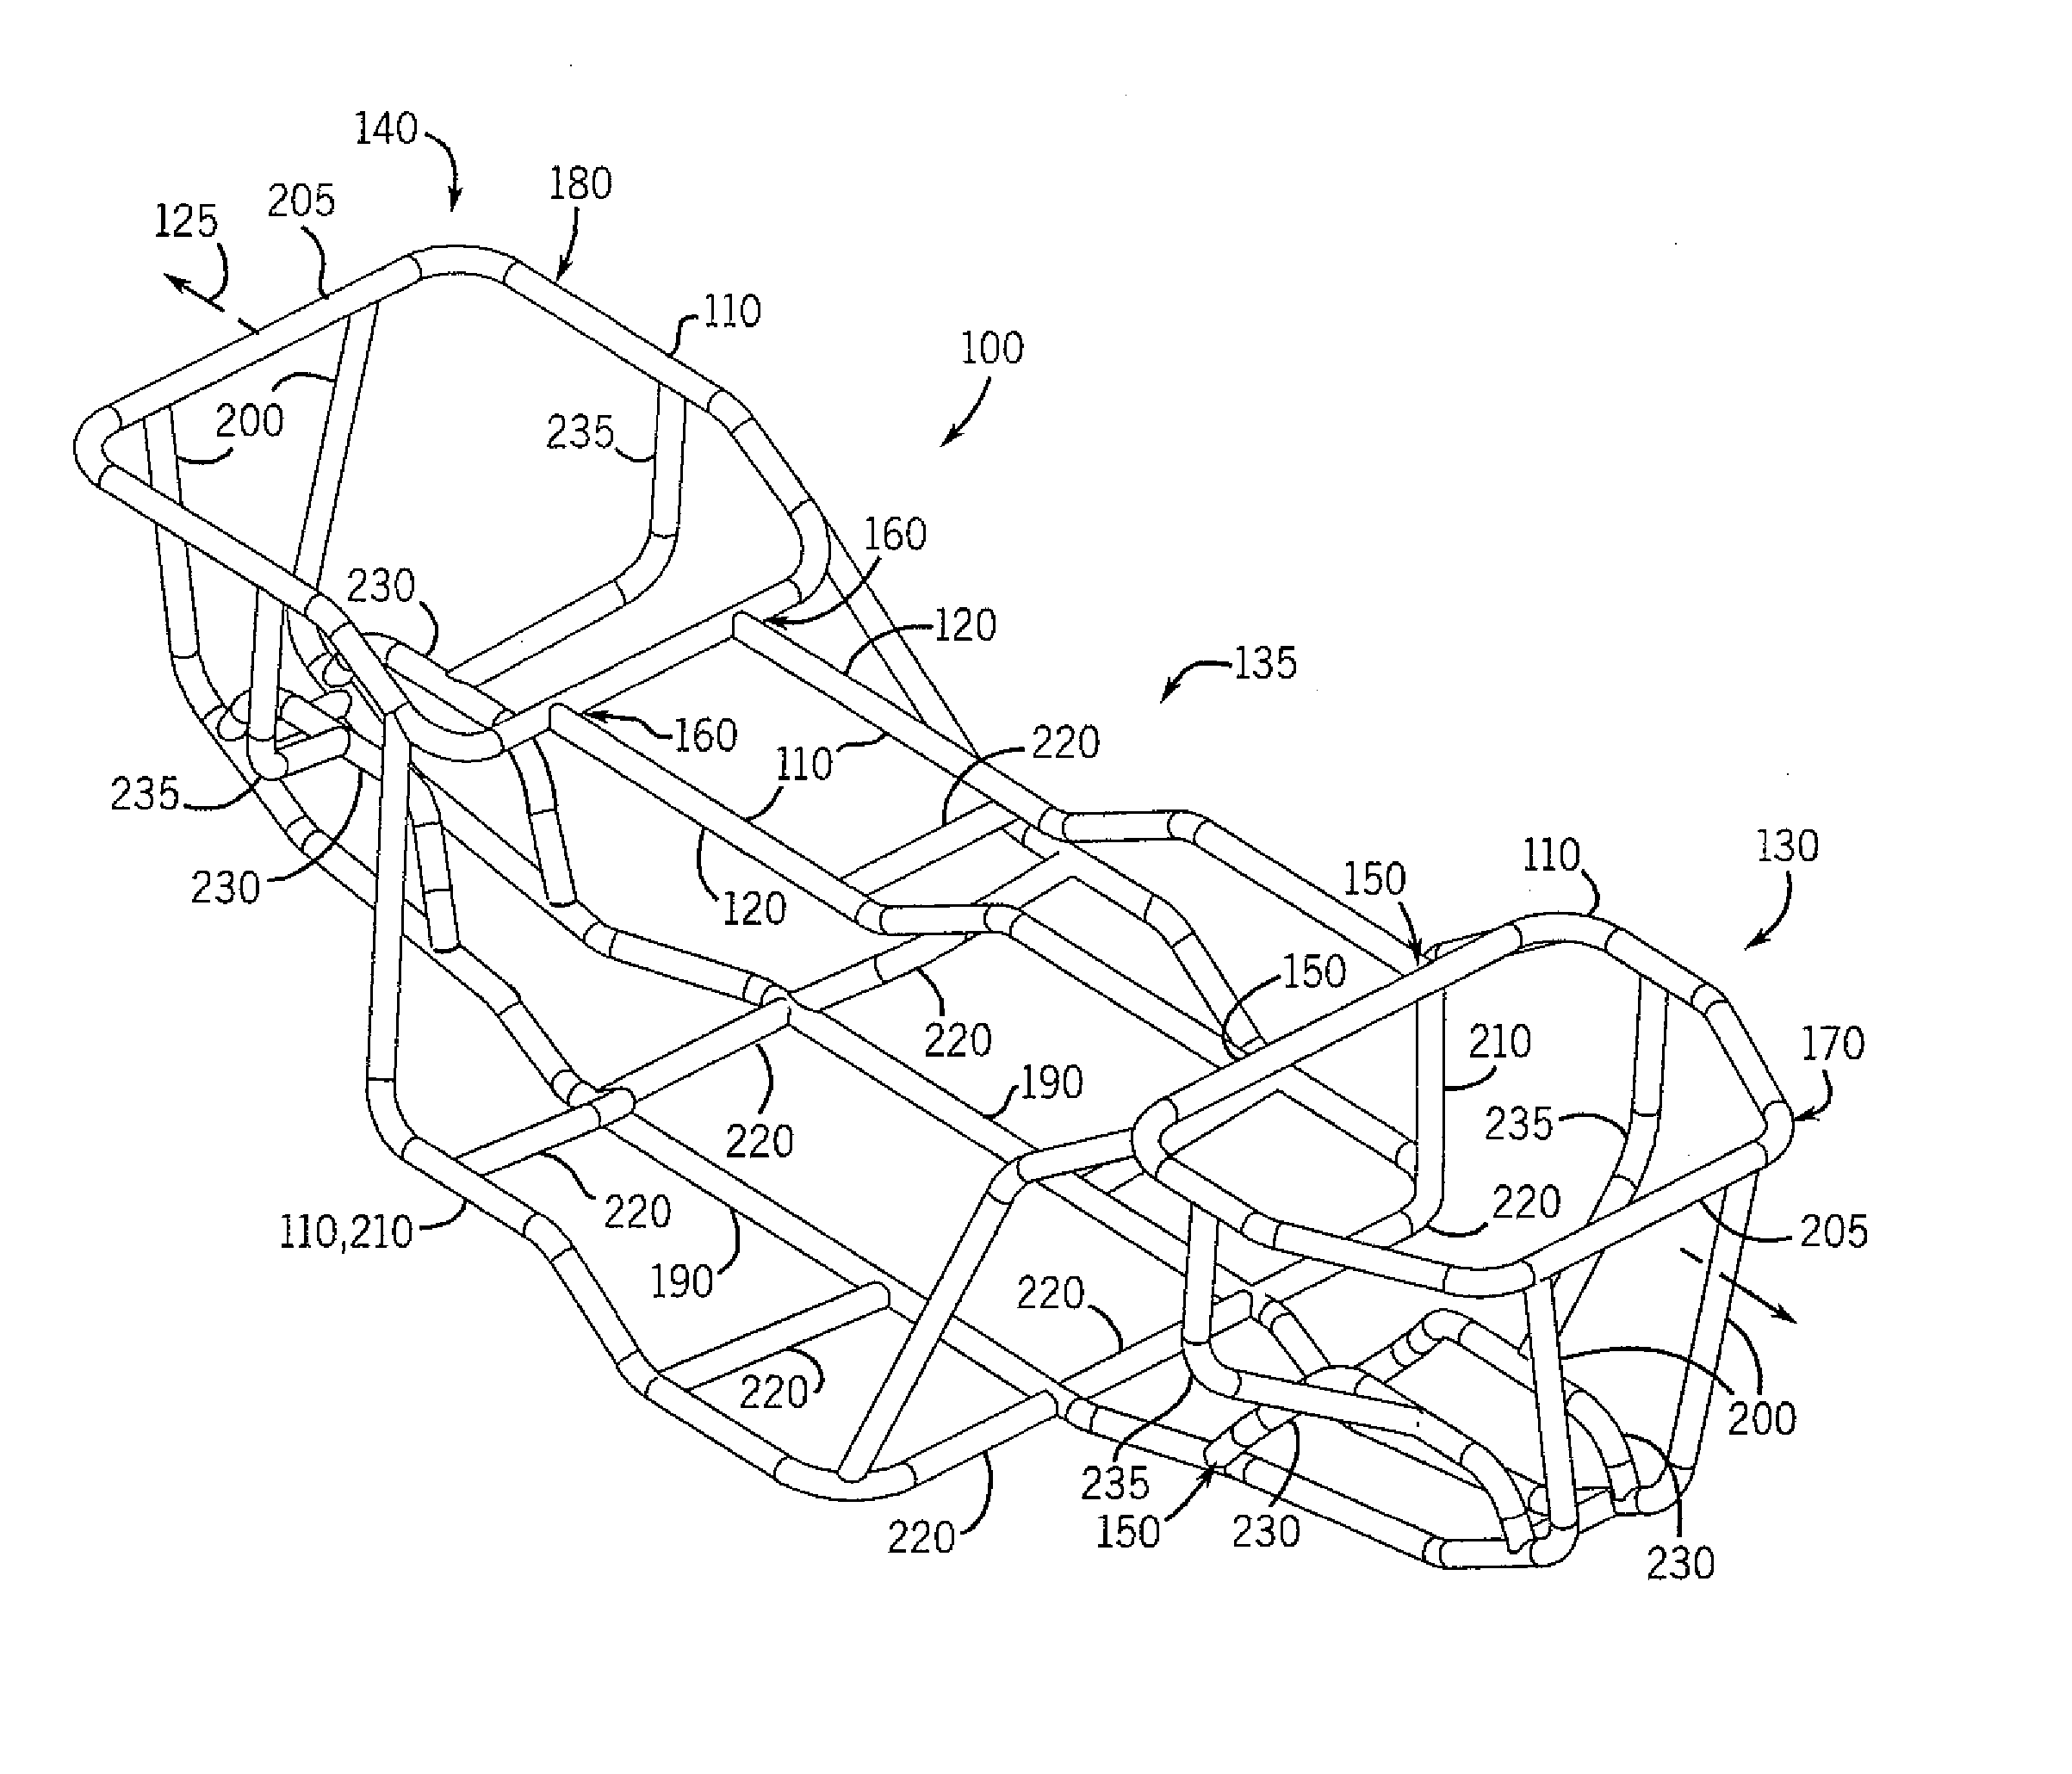 Reduced-size vehicle with compartments providing buoyancy